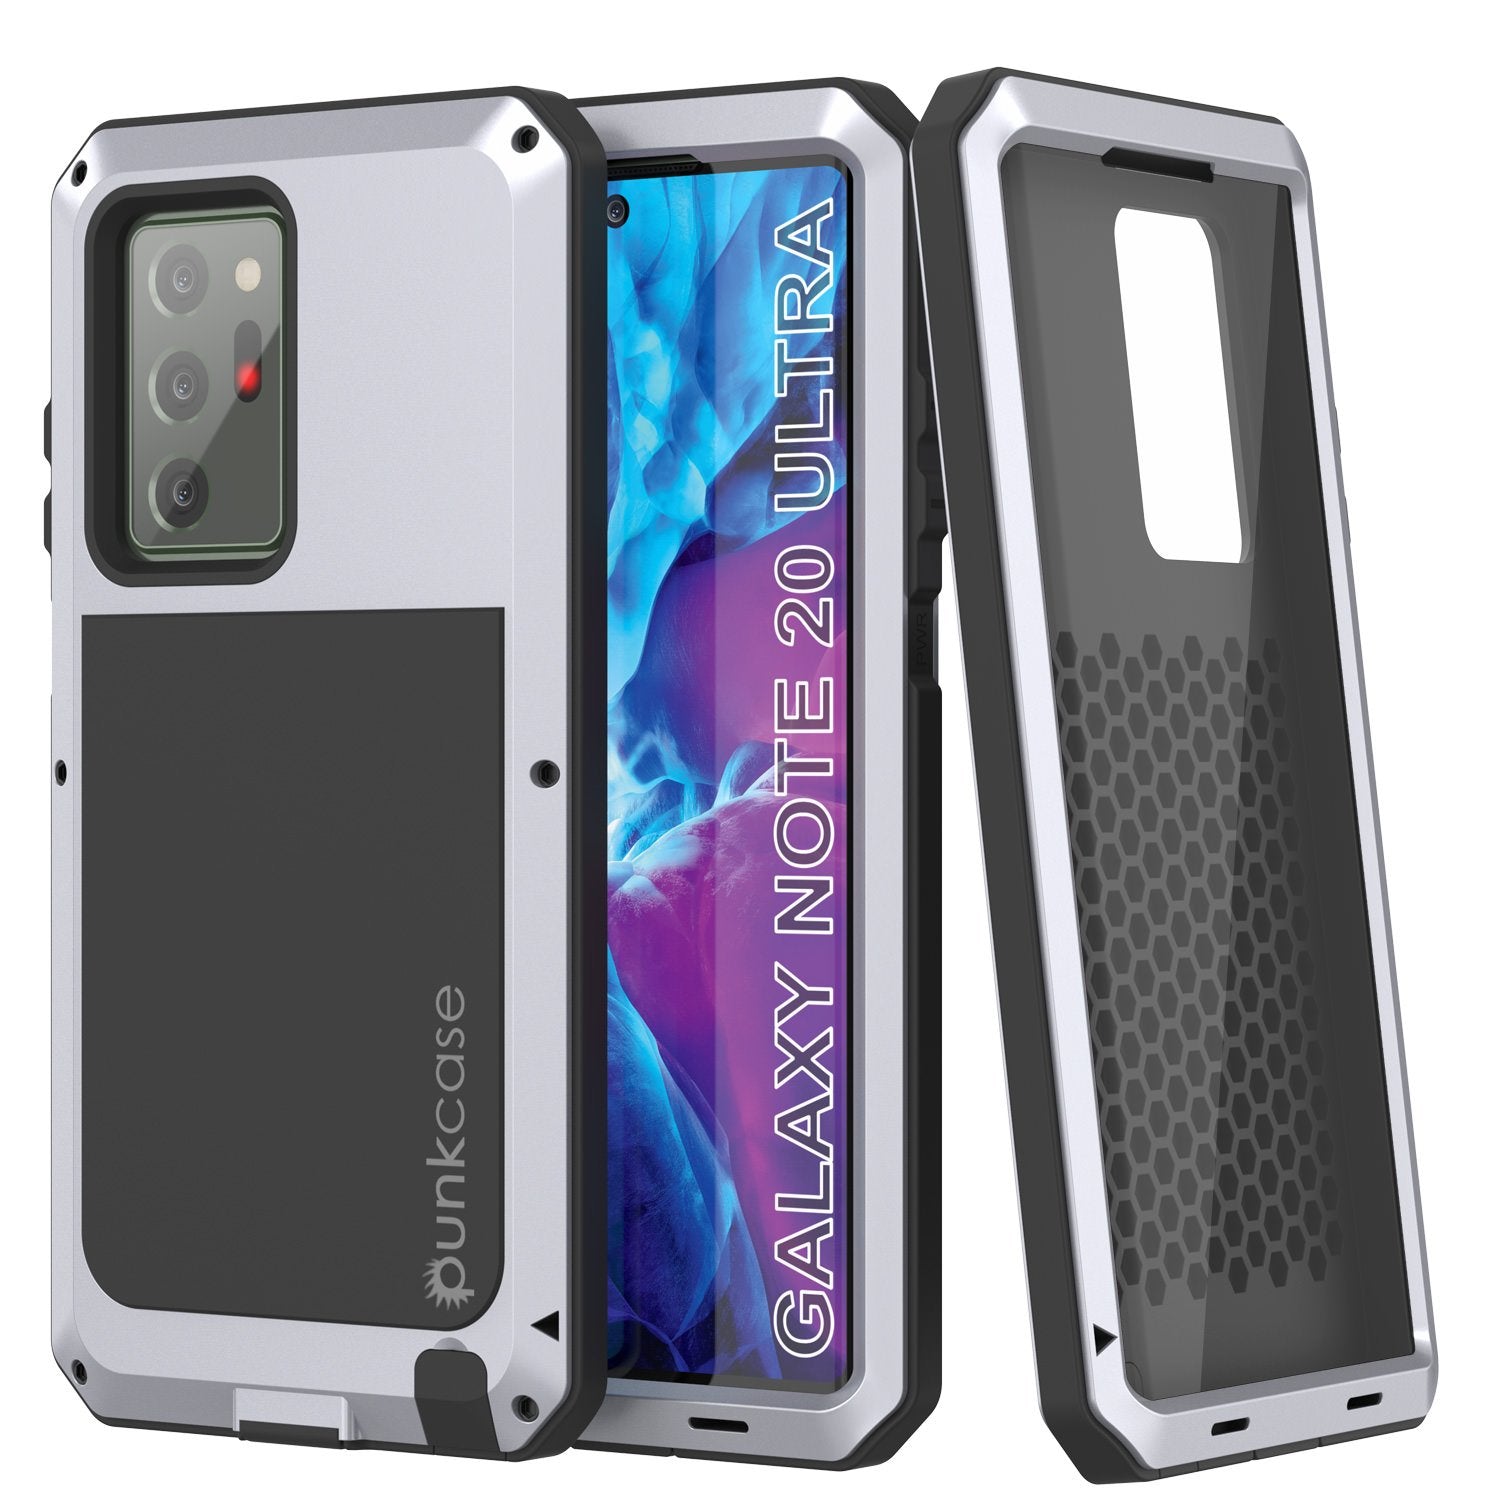 Galaxy Note 20 Ultra  Case, PUNKcase Metallic White Shockproof  Slim Metal Armor Case [White] (Color in image: white)